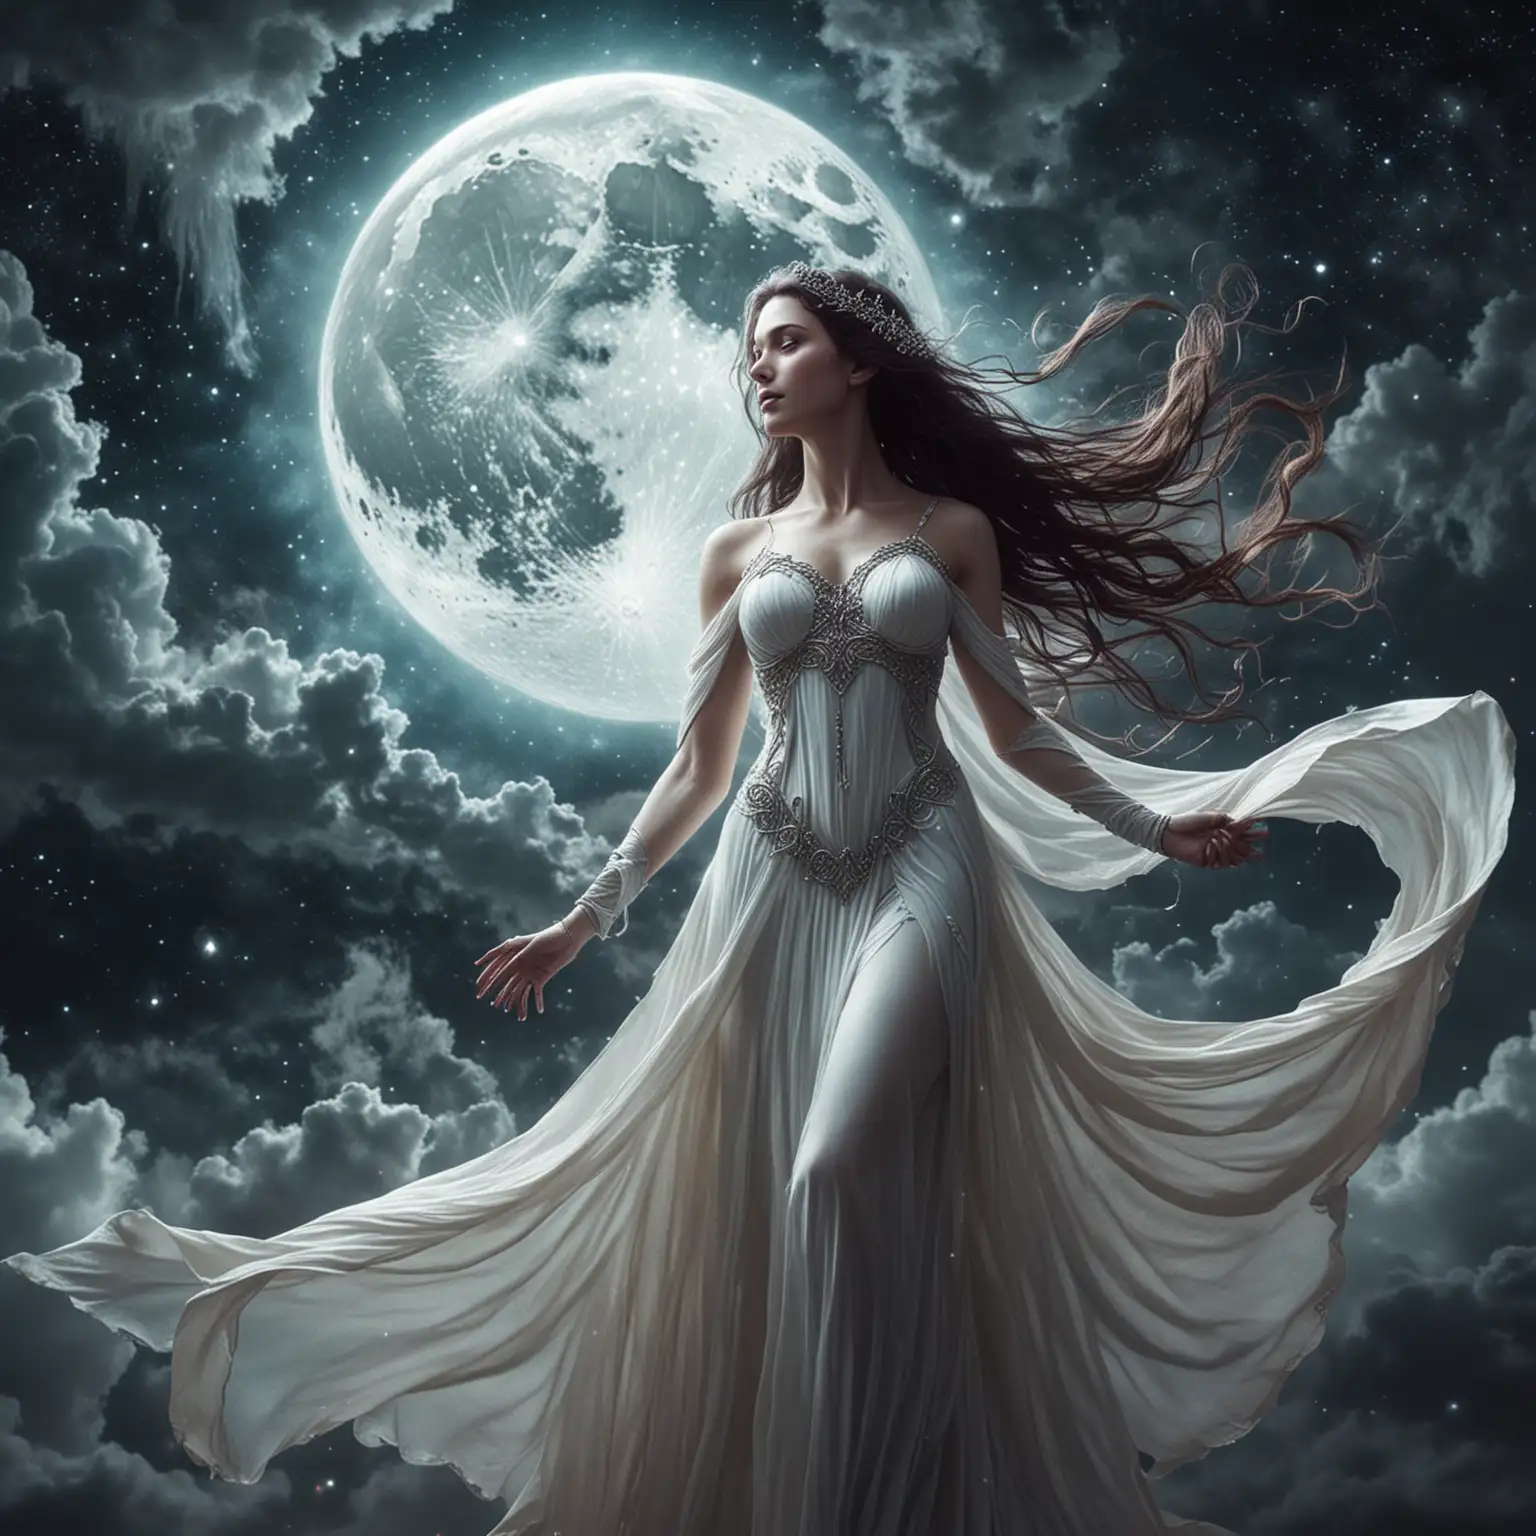 One fateful night, as the Moon of Lumina waxed full, Lysandra sensed a disturbance. A rift had torn across the celestial veil, threatening to unravel the cosmic threads. Guided by ancient whispers, she embarked on a quest to mend the breach.

